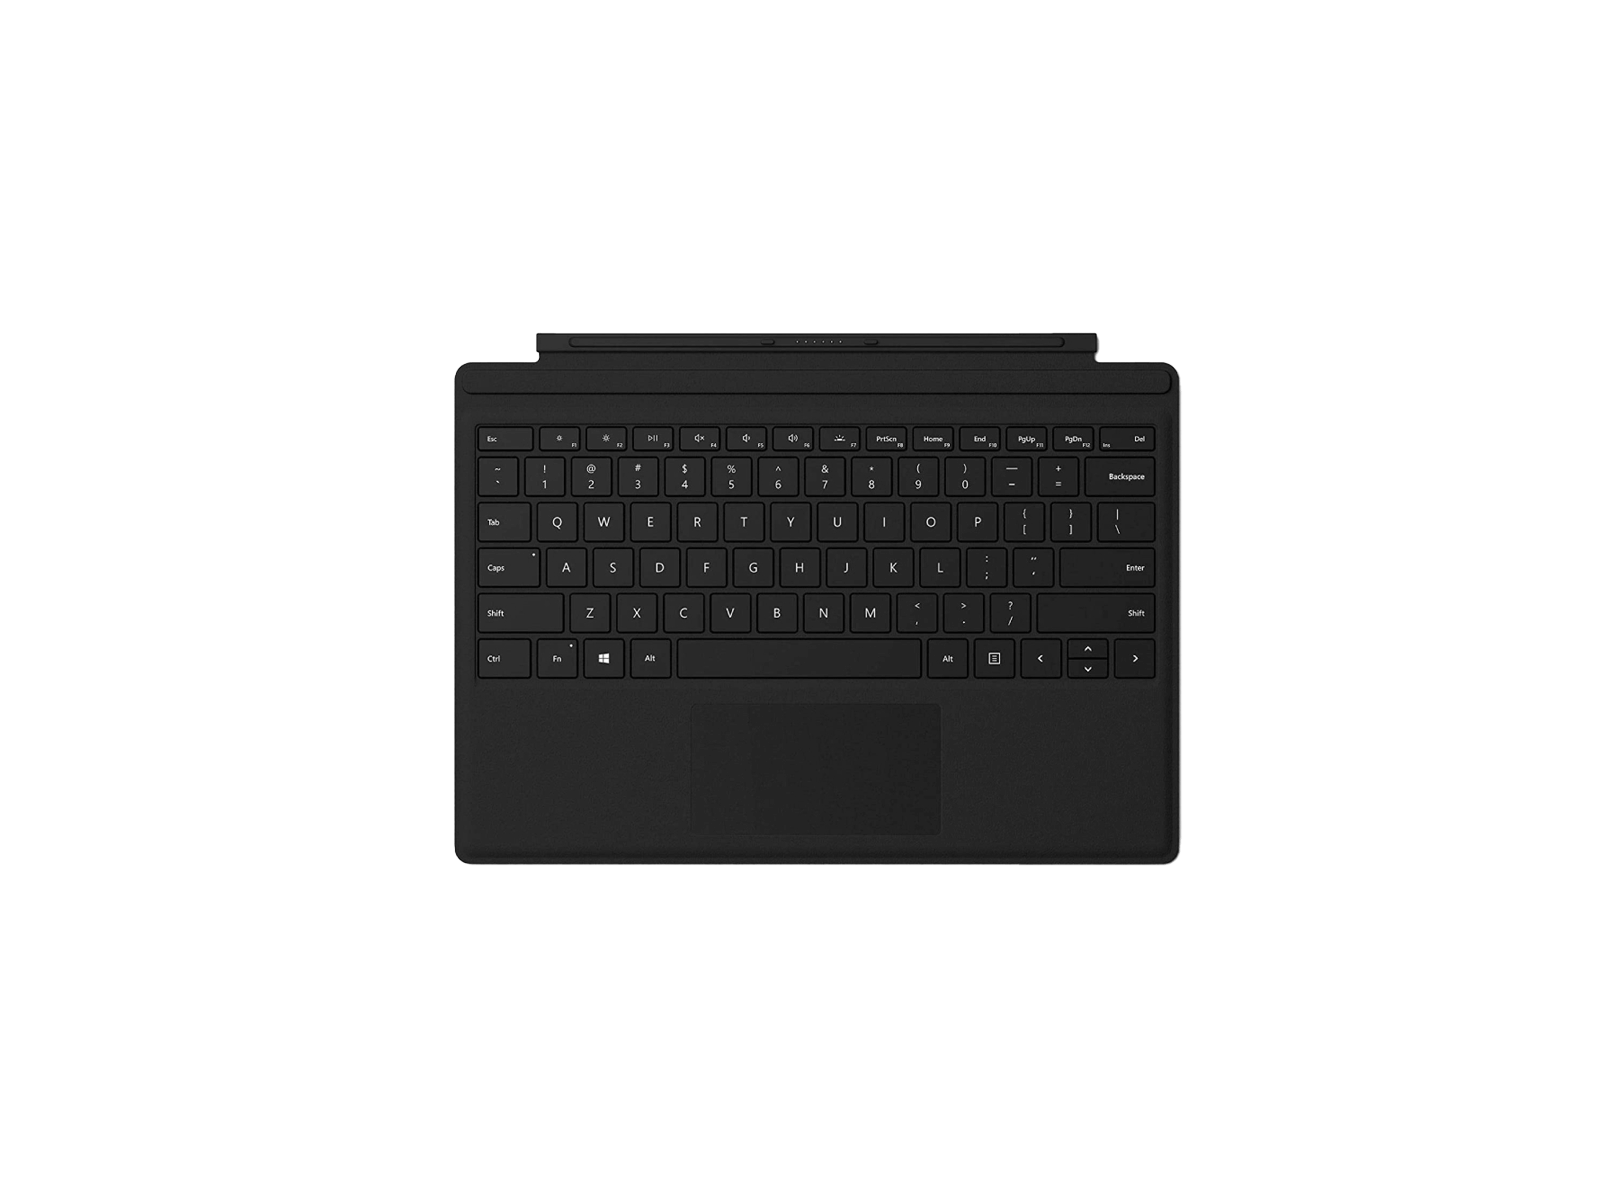 New Sealed Microsoft Surface Pro 4 5 6 7 7+ Type Cover Keyboard Black FMN-00001.